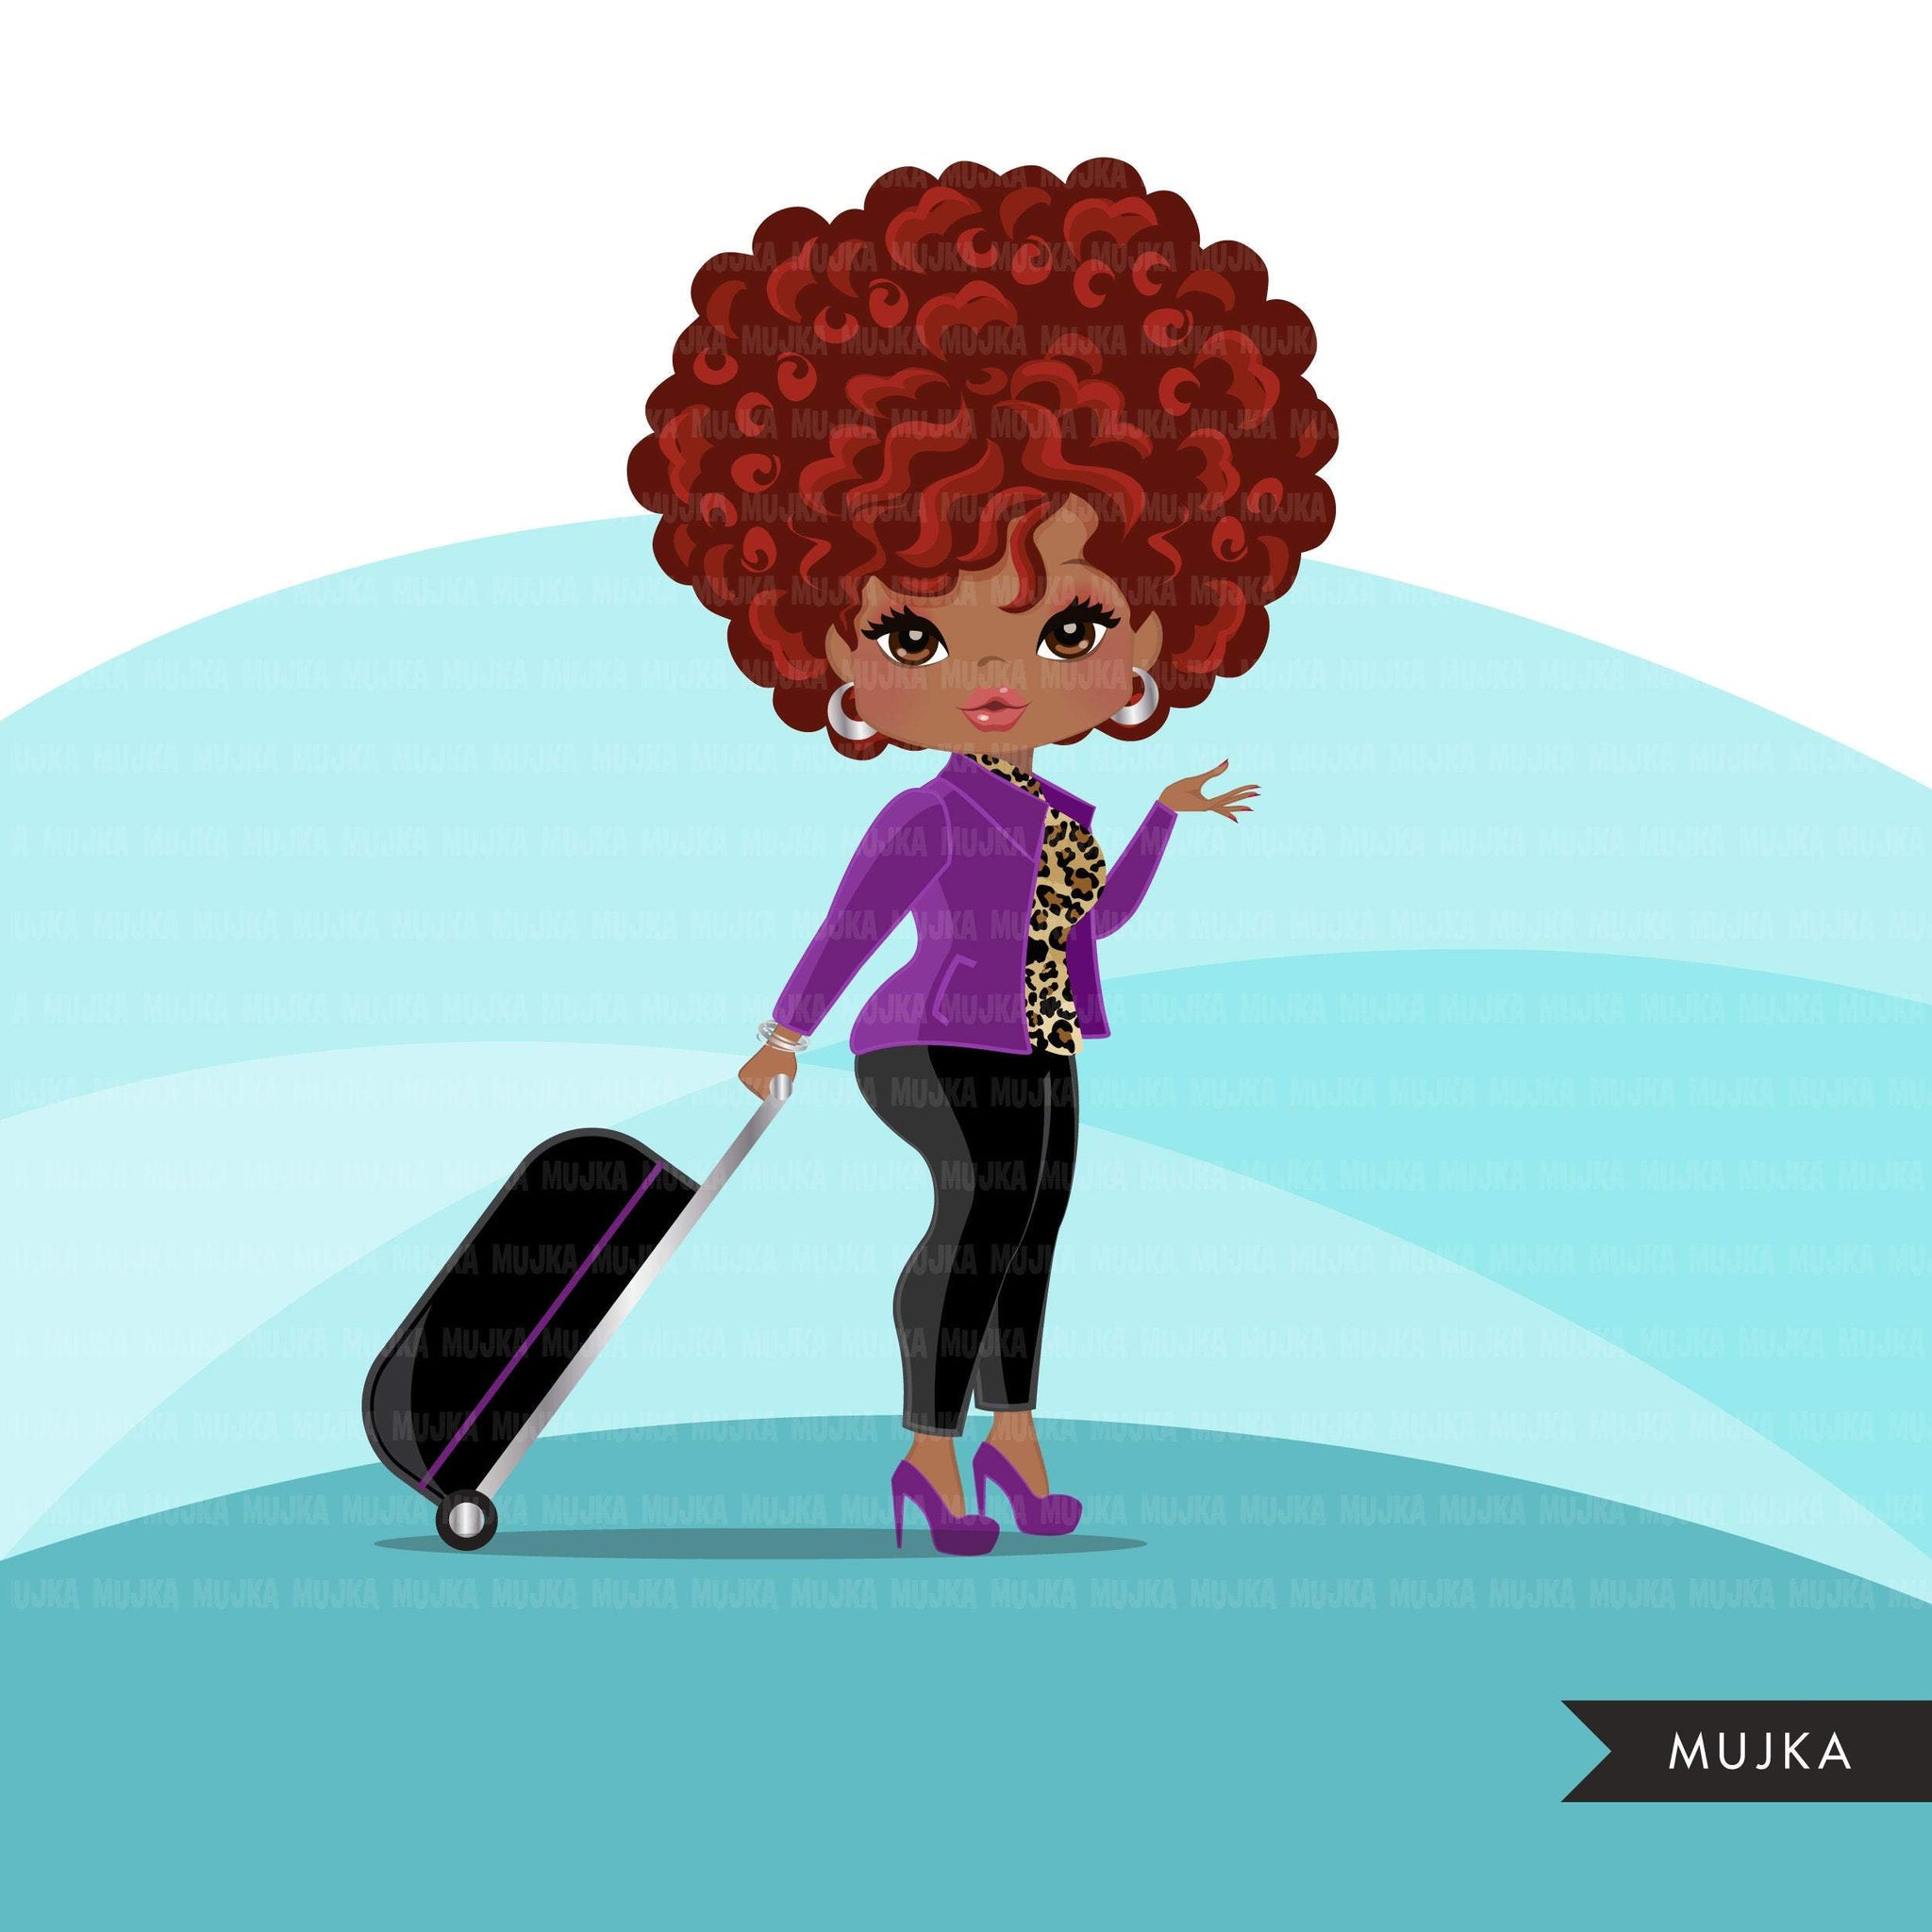 Travelling black woman clipart avatar with suitcase, print and cut, shop logo boss afro girl clip art purple leopard skin graphics